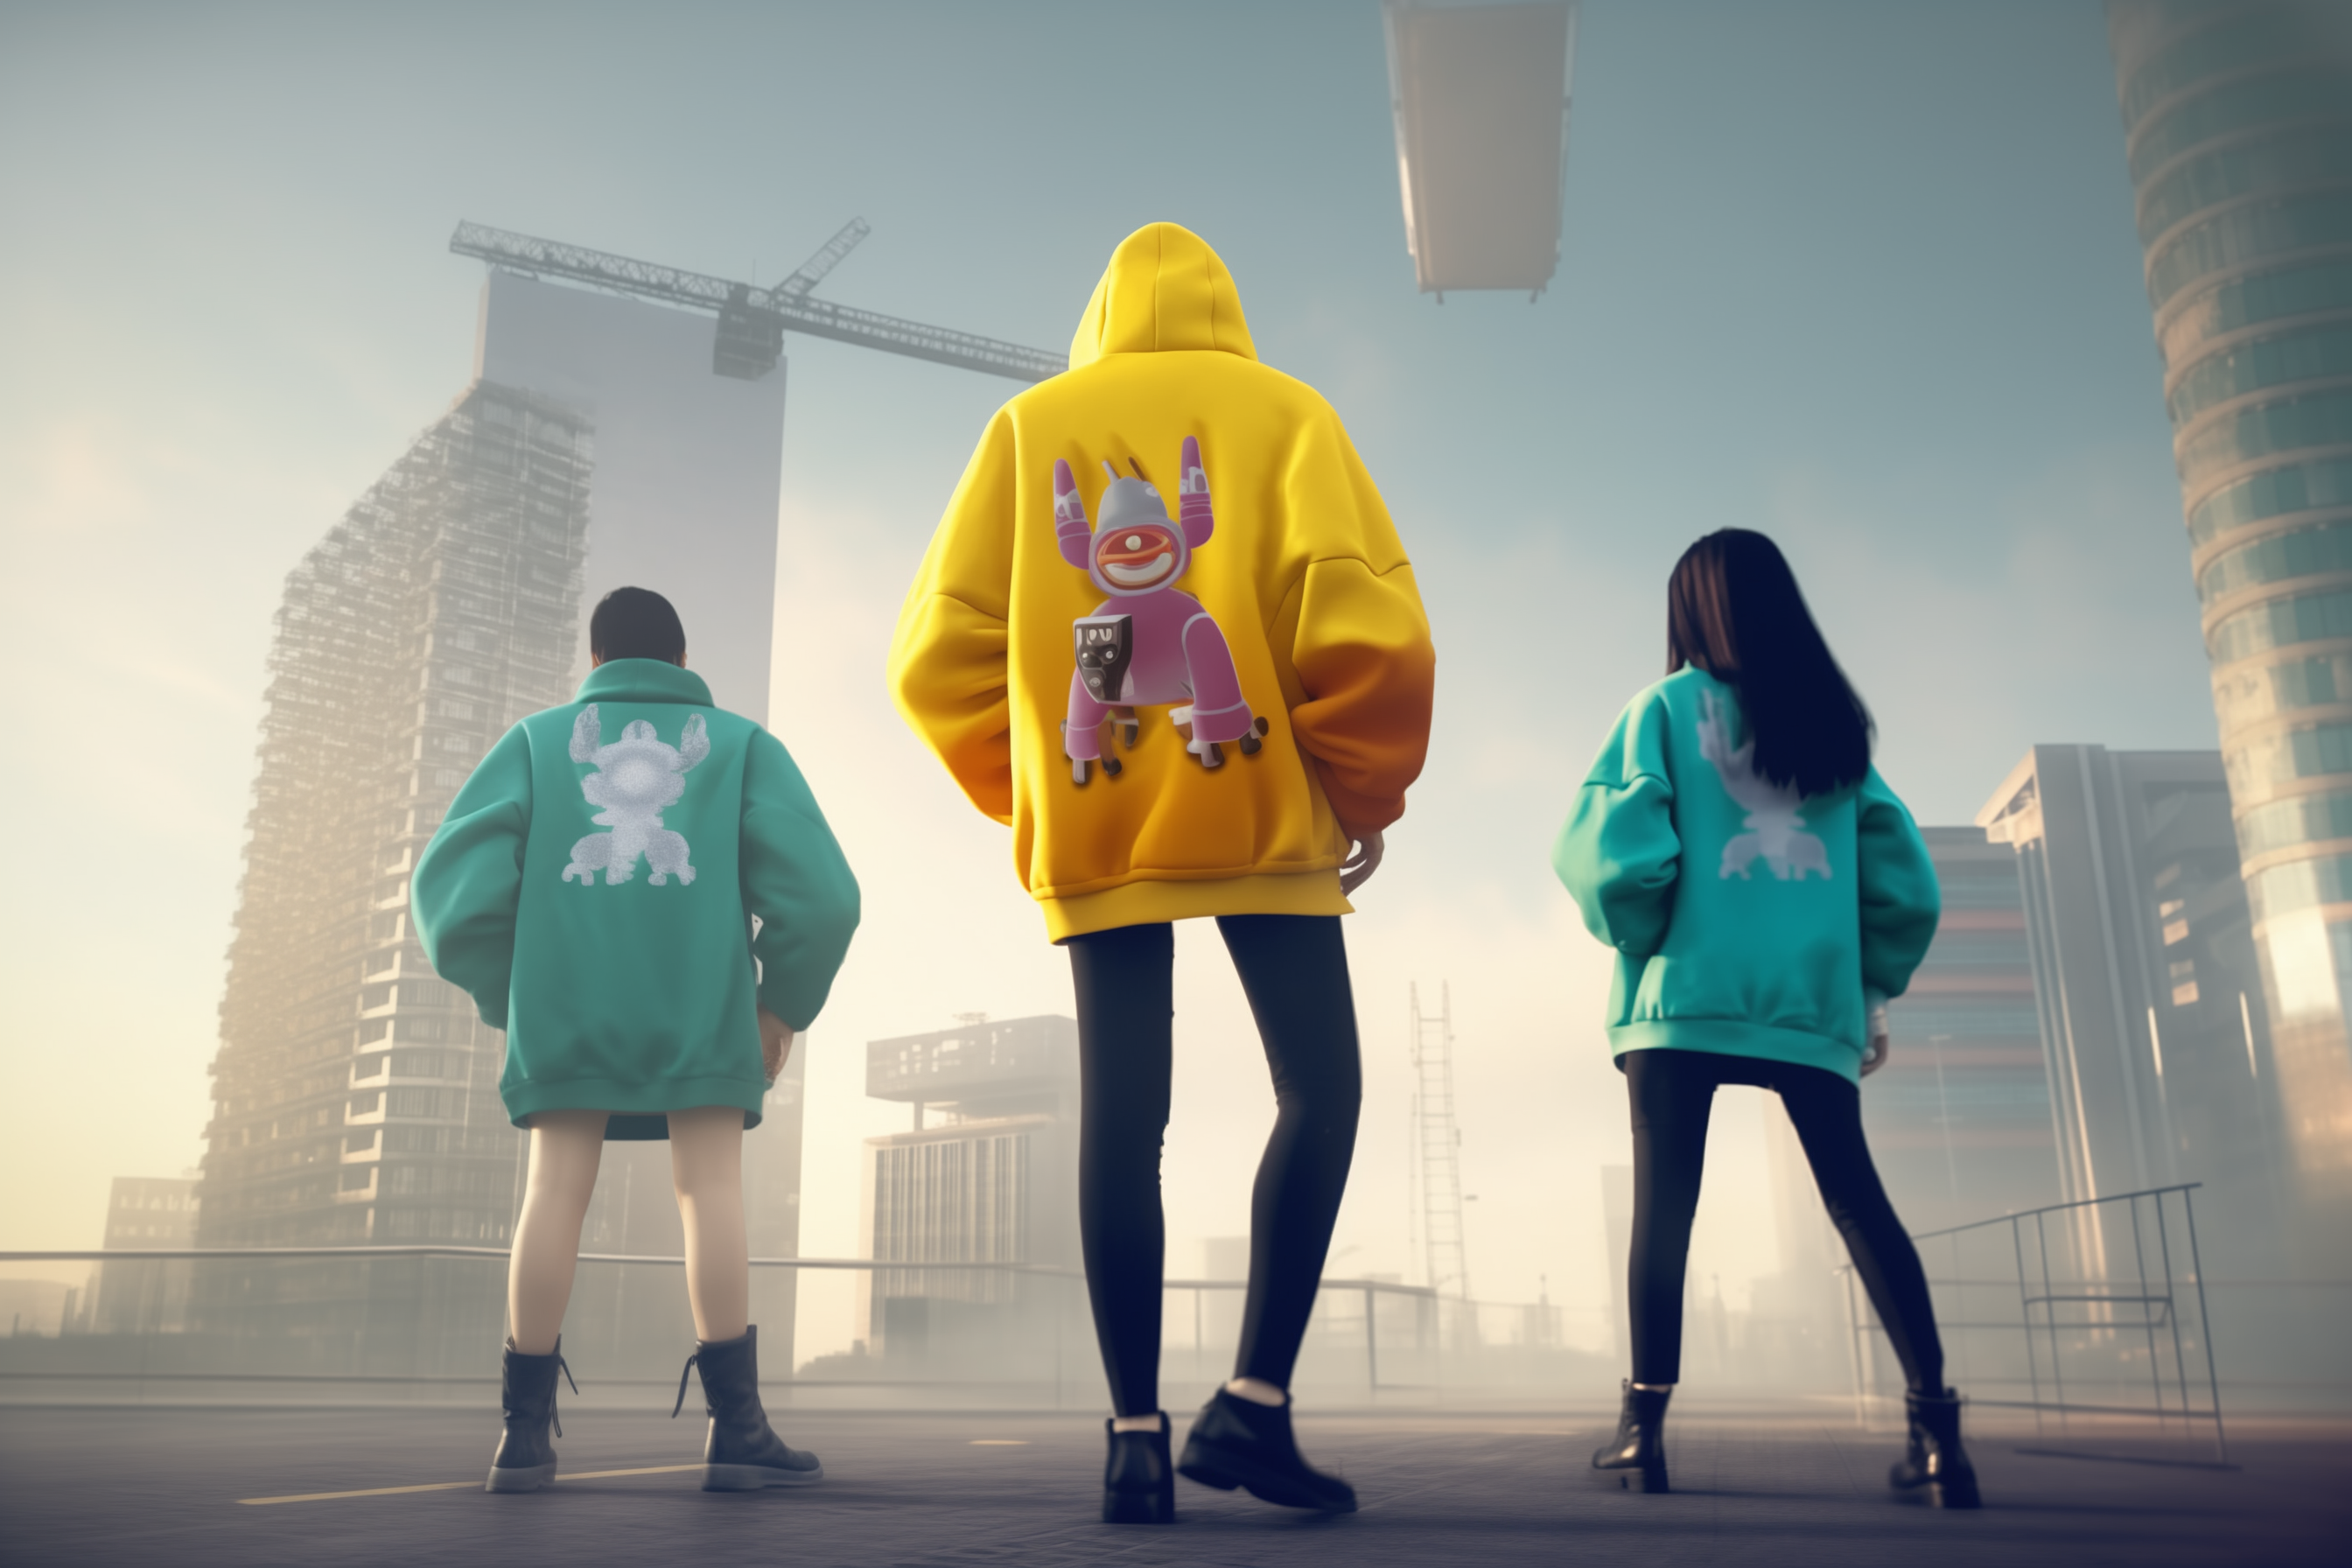 A remixed version of the Cyberpunk 2077 promotional image. This image is made with AI and features three women overlooking a futuristic city. The woman in the center is wearing a yellow hoodie with a monster logo on it.